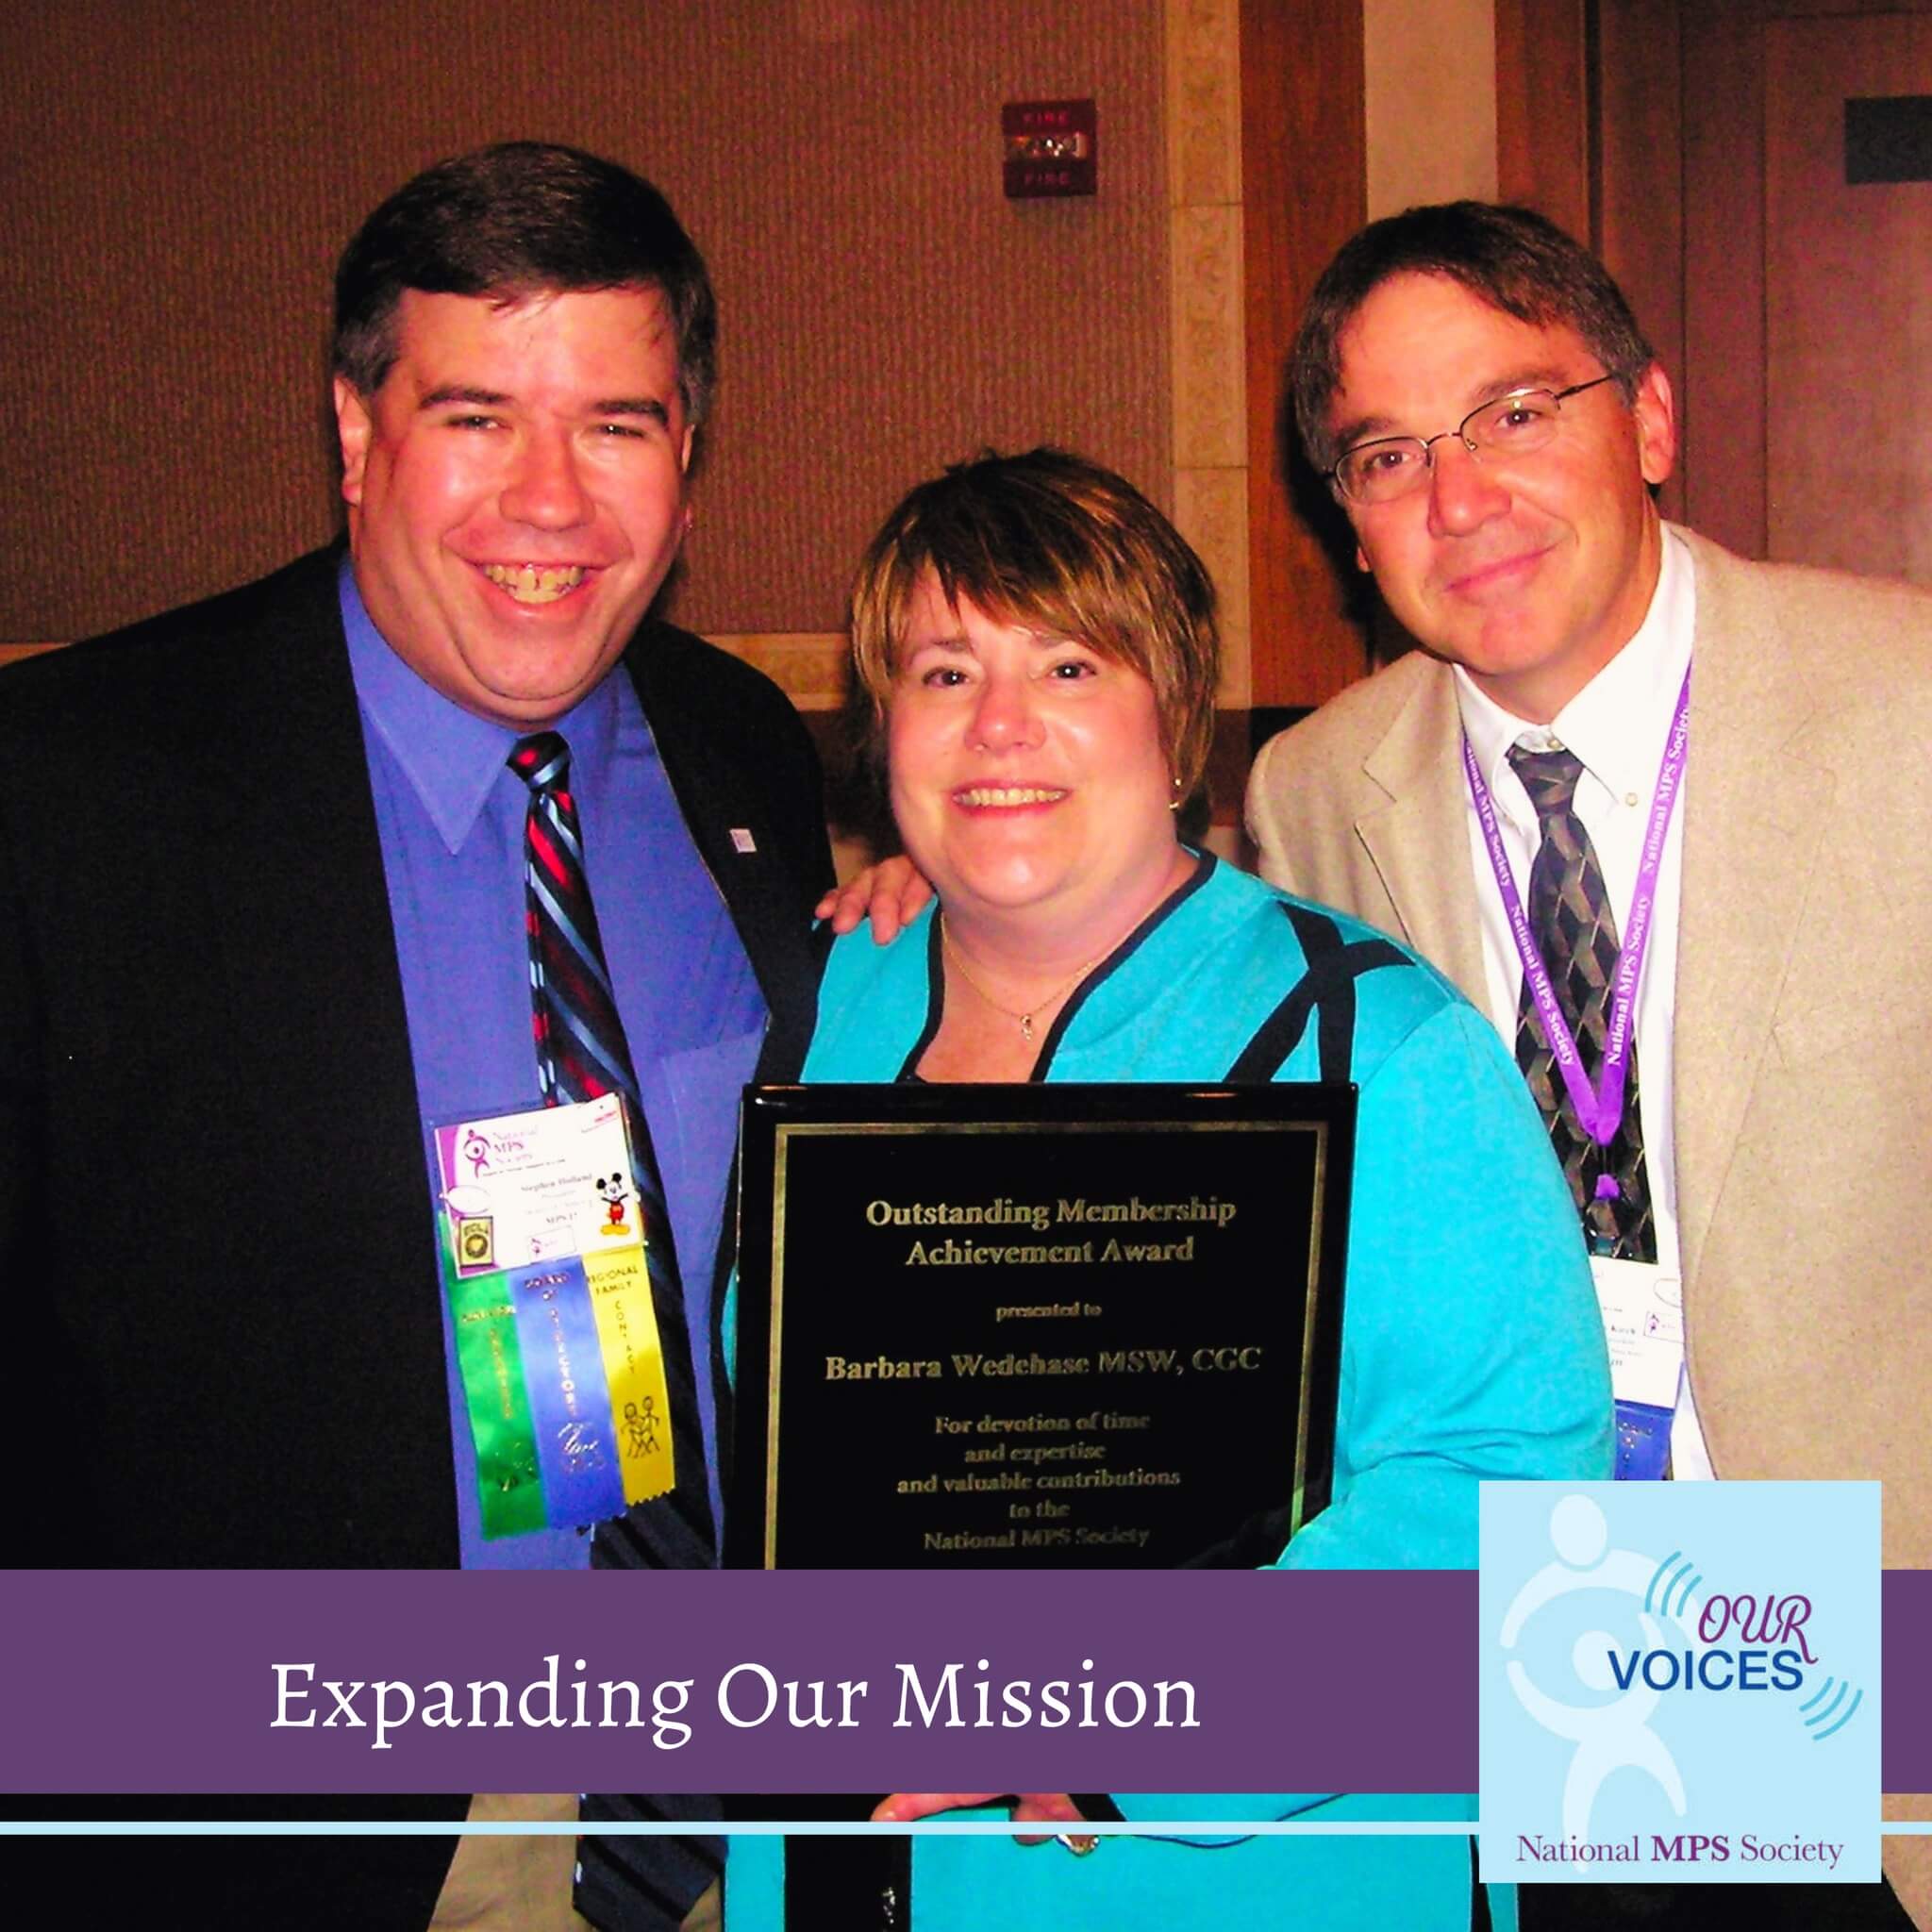 Our Voices Episode 3: Expanding Our Mission Featured Image